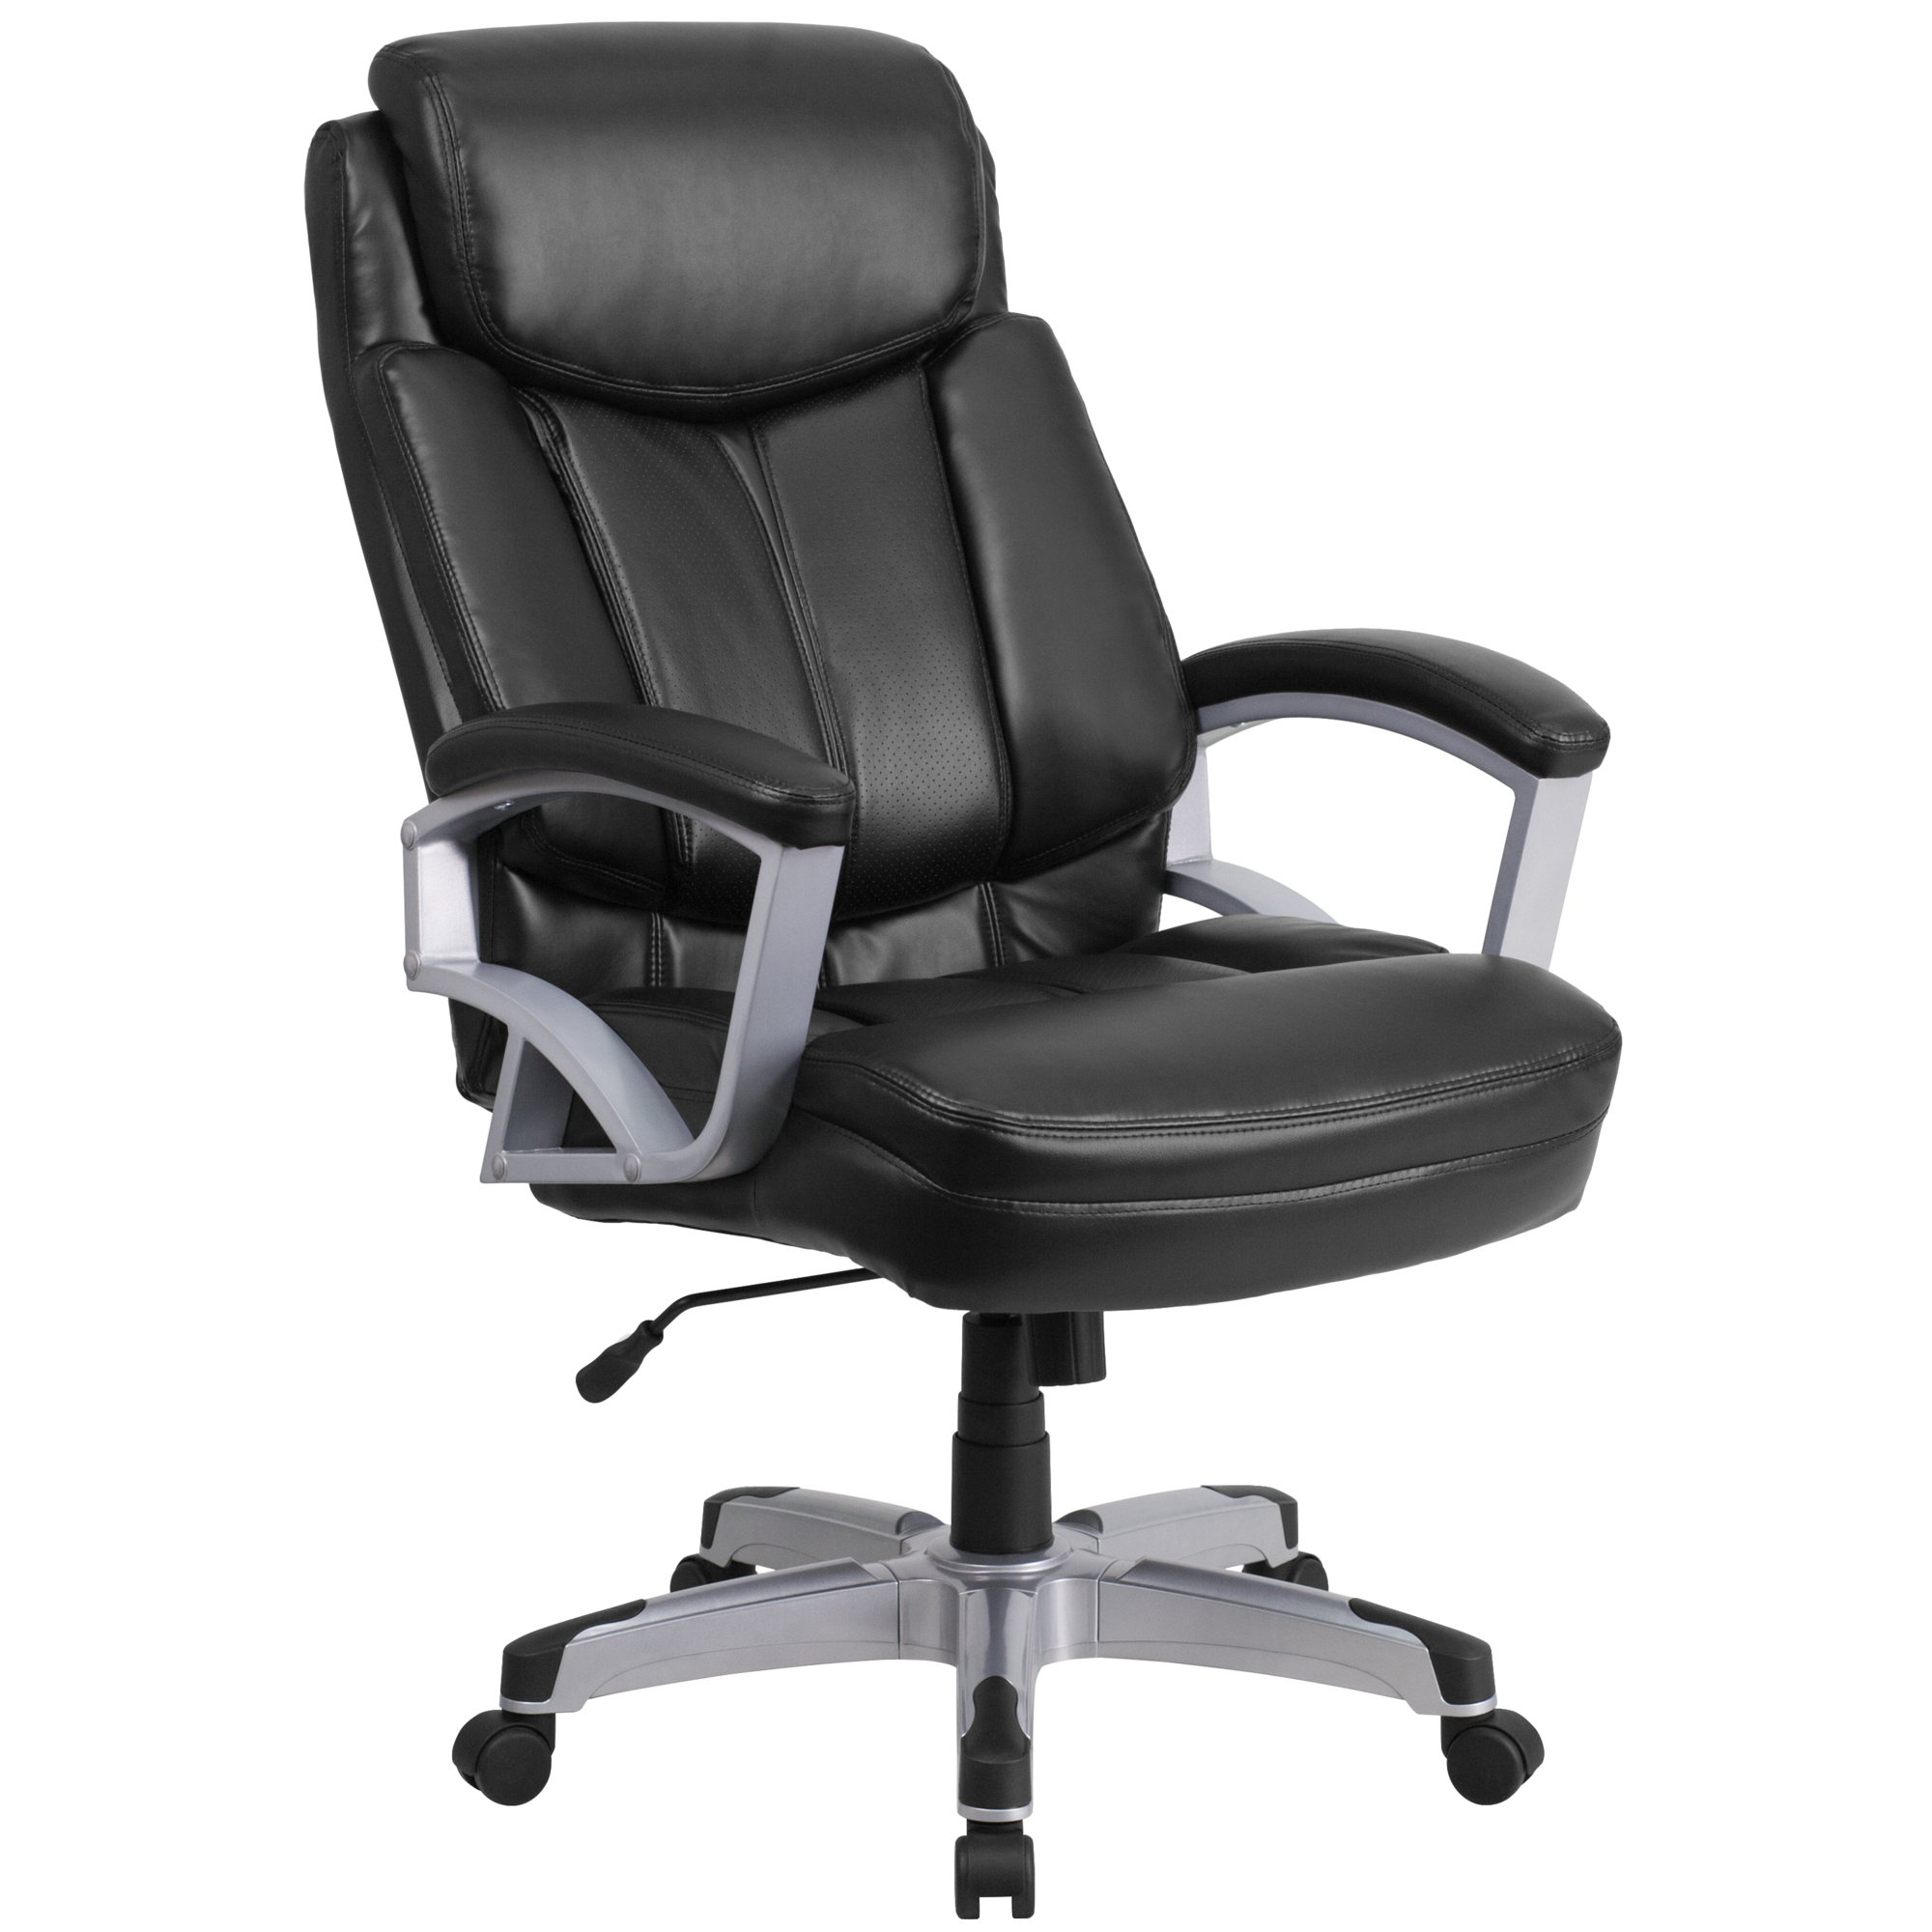 Flash Furniture, Big Tall 500 lb. Rated Black LeatherSoft Chair, Primary Color Black, Included (qty.) 1, Model GO18501LEA